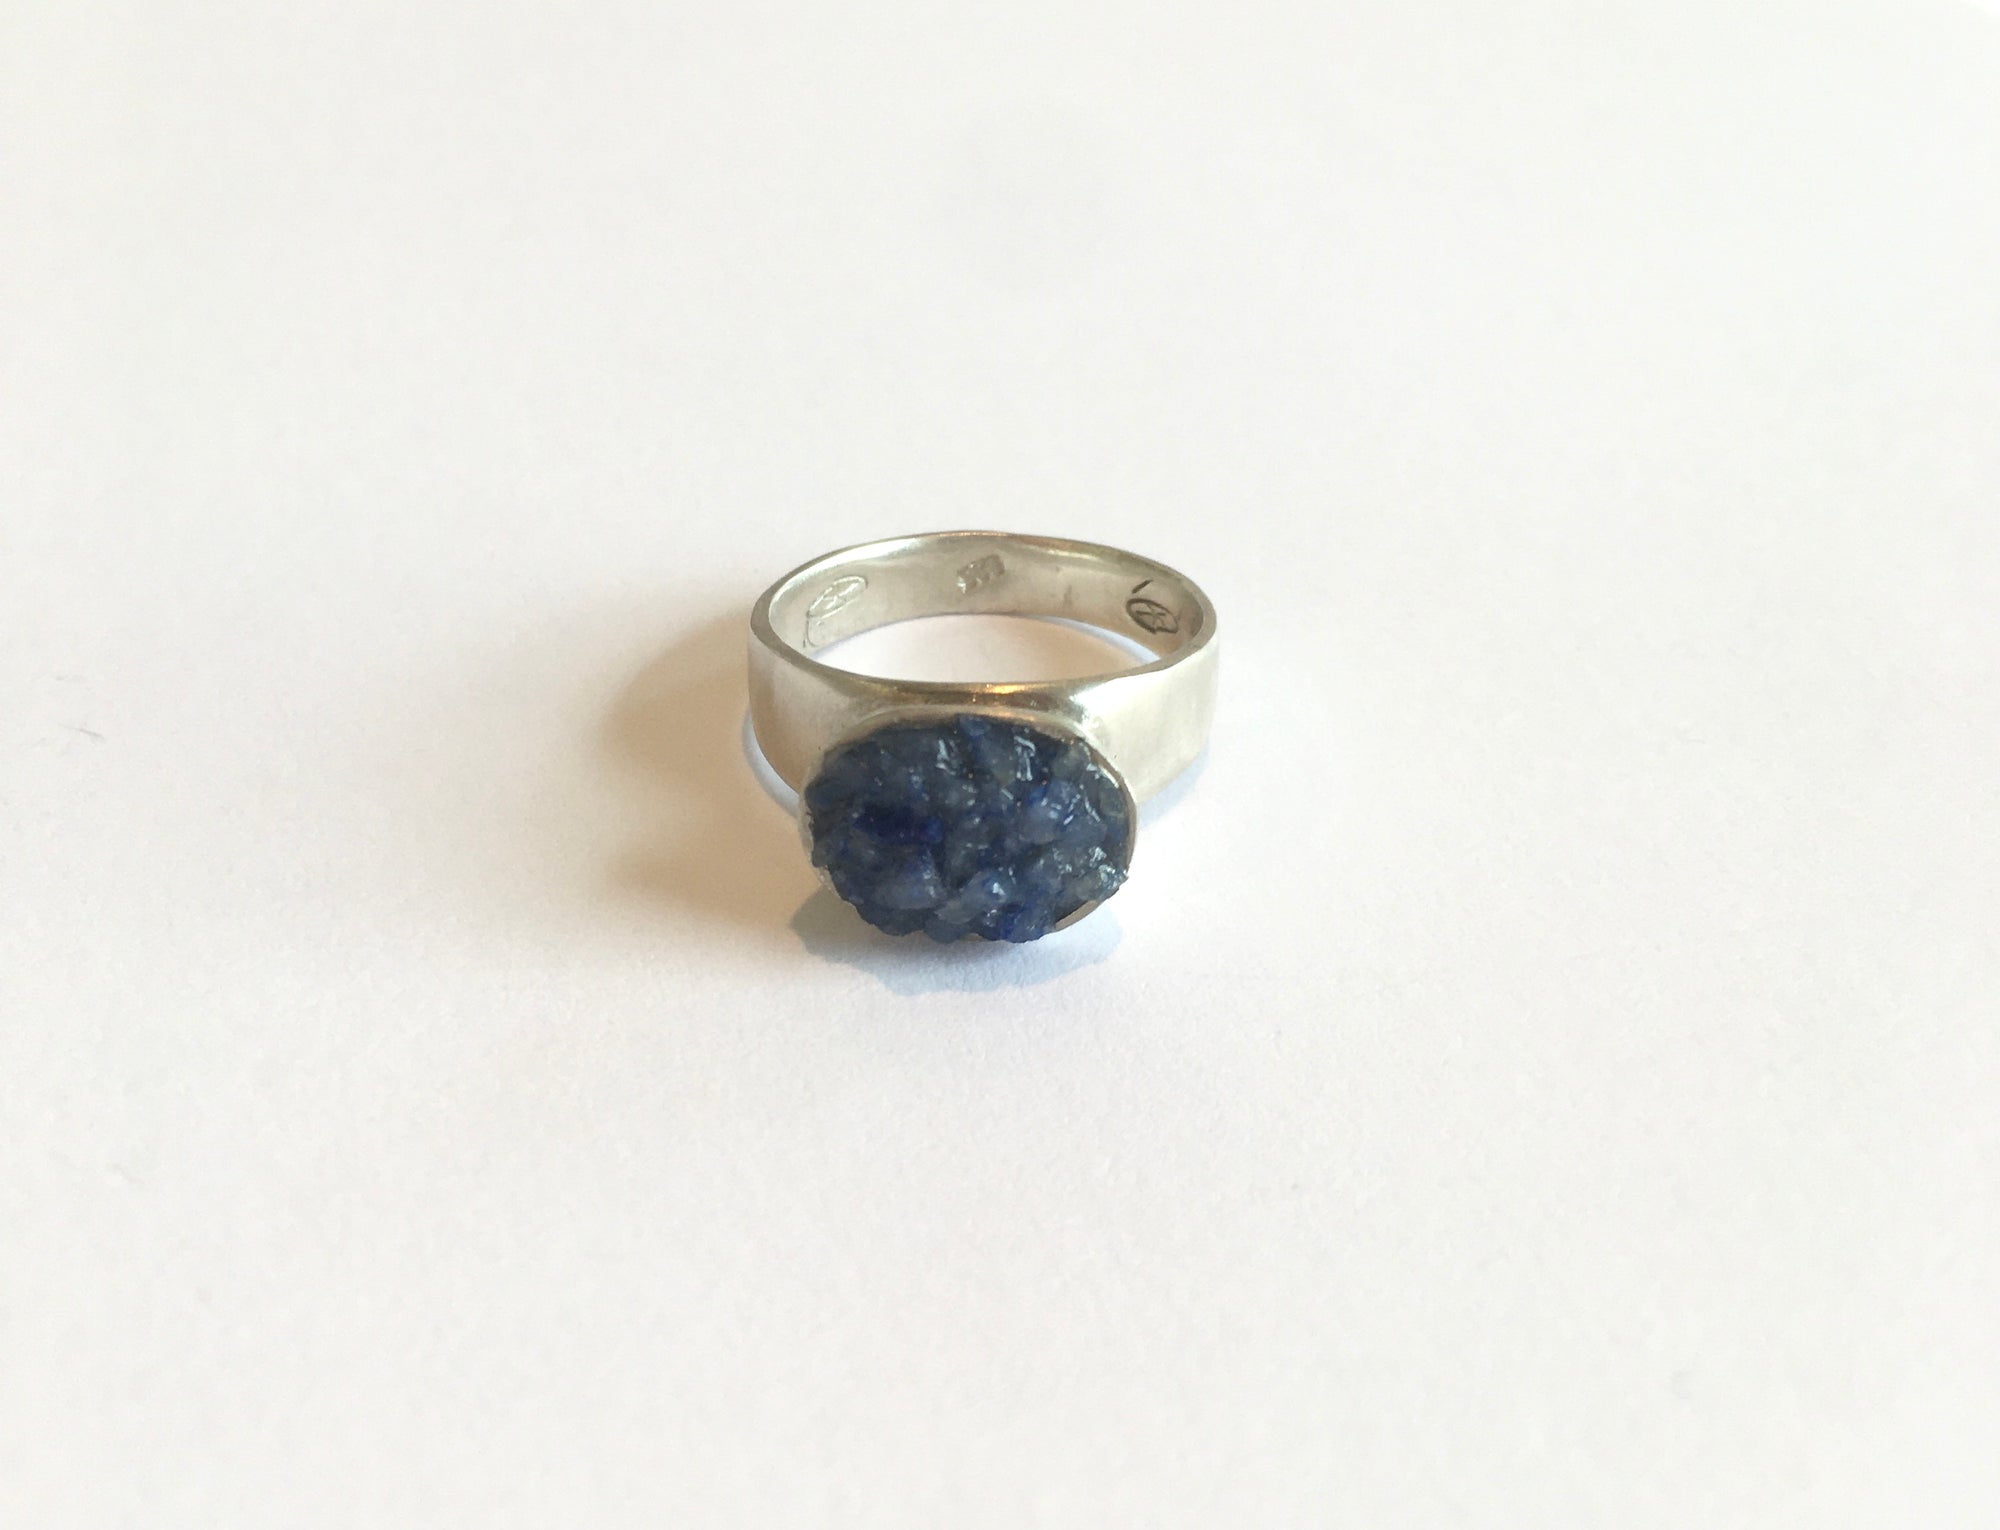 “Baby Crush Cup” ring sterling silver and blue quartz